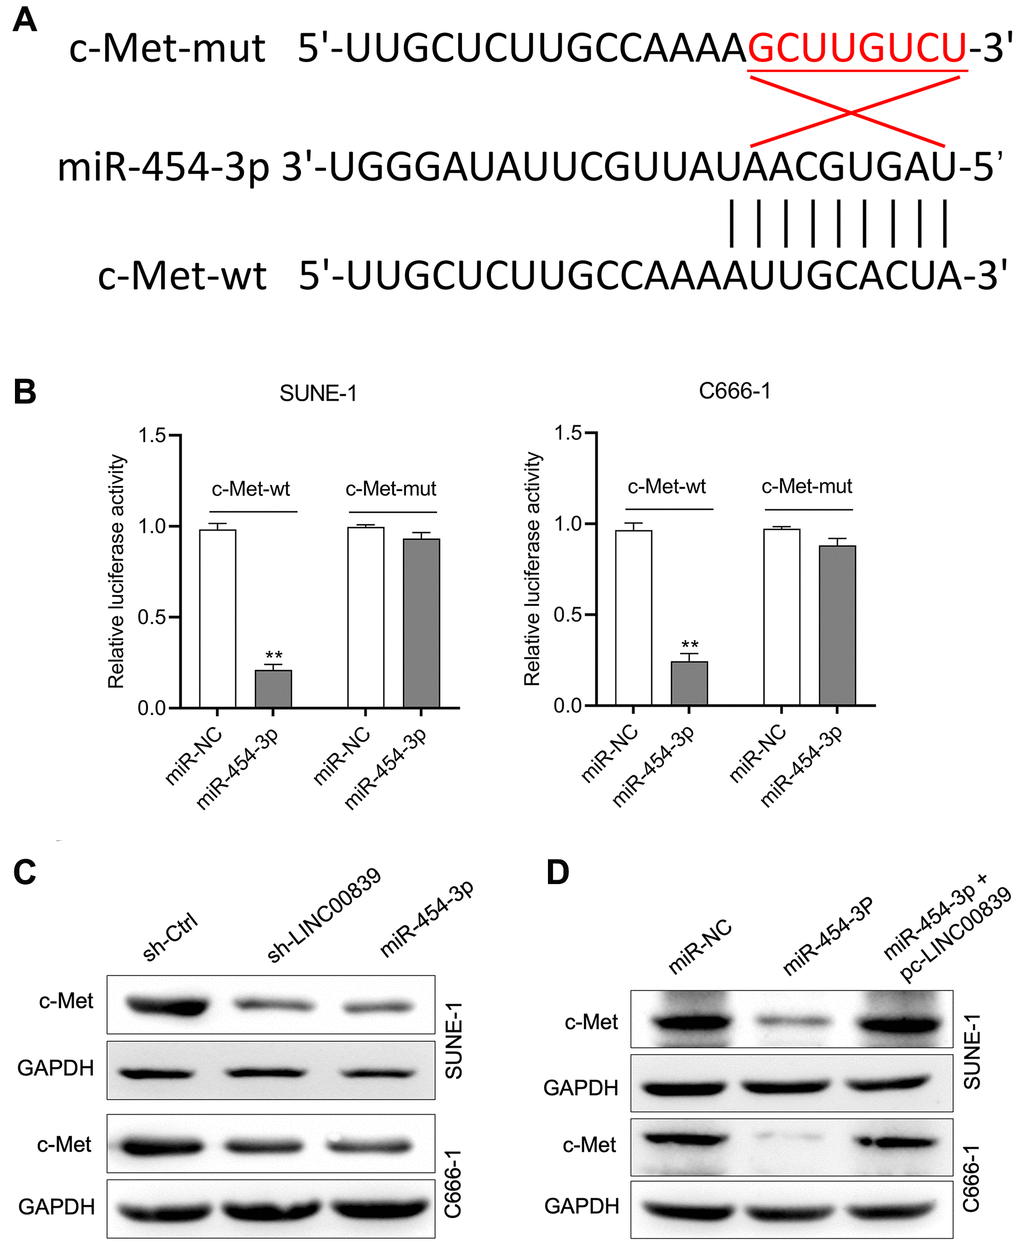 c-Met was a target gene for miR-454-3p. (A) The predicted miR-454-3p binding sites in the 3′-UTR of c-Met gene according to Targetscan. (B) Luciferase activity of wild-type (wt) or mutant (mut) c-Met 3′-UTR in SUNE-1 and C666-1 cells transfected with miR-454-3p mimic or miR-NC. **P C) Western blot detected the effect of miR-454-3p and sh-LINC00839 on c-Met protein expression in SUNE-1 and C666-1 cells. (D) SUNE-1 and C666-1 cells were transfected with miR-454-3p or co-transfected with miR-454-3p and pc-LINC00839. The expression of c-Met was determined by western blot.